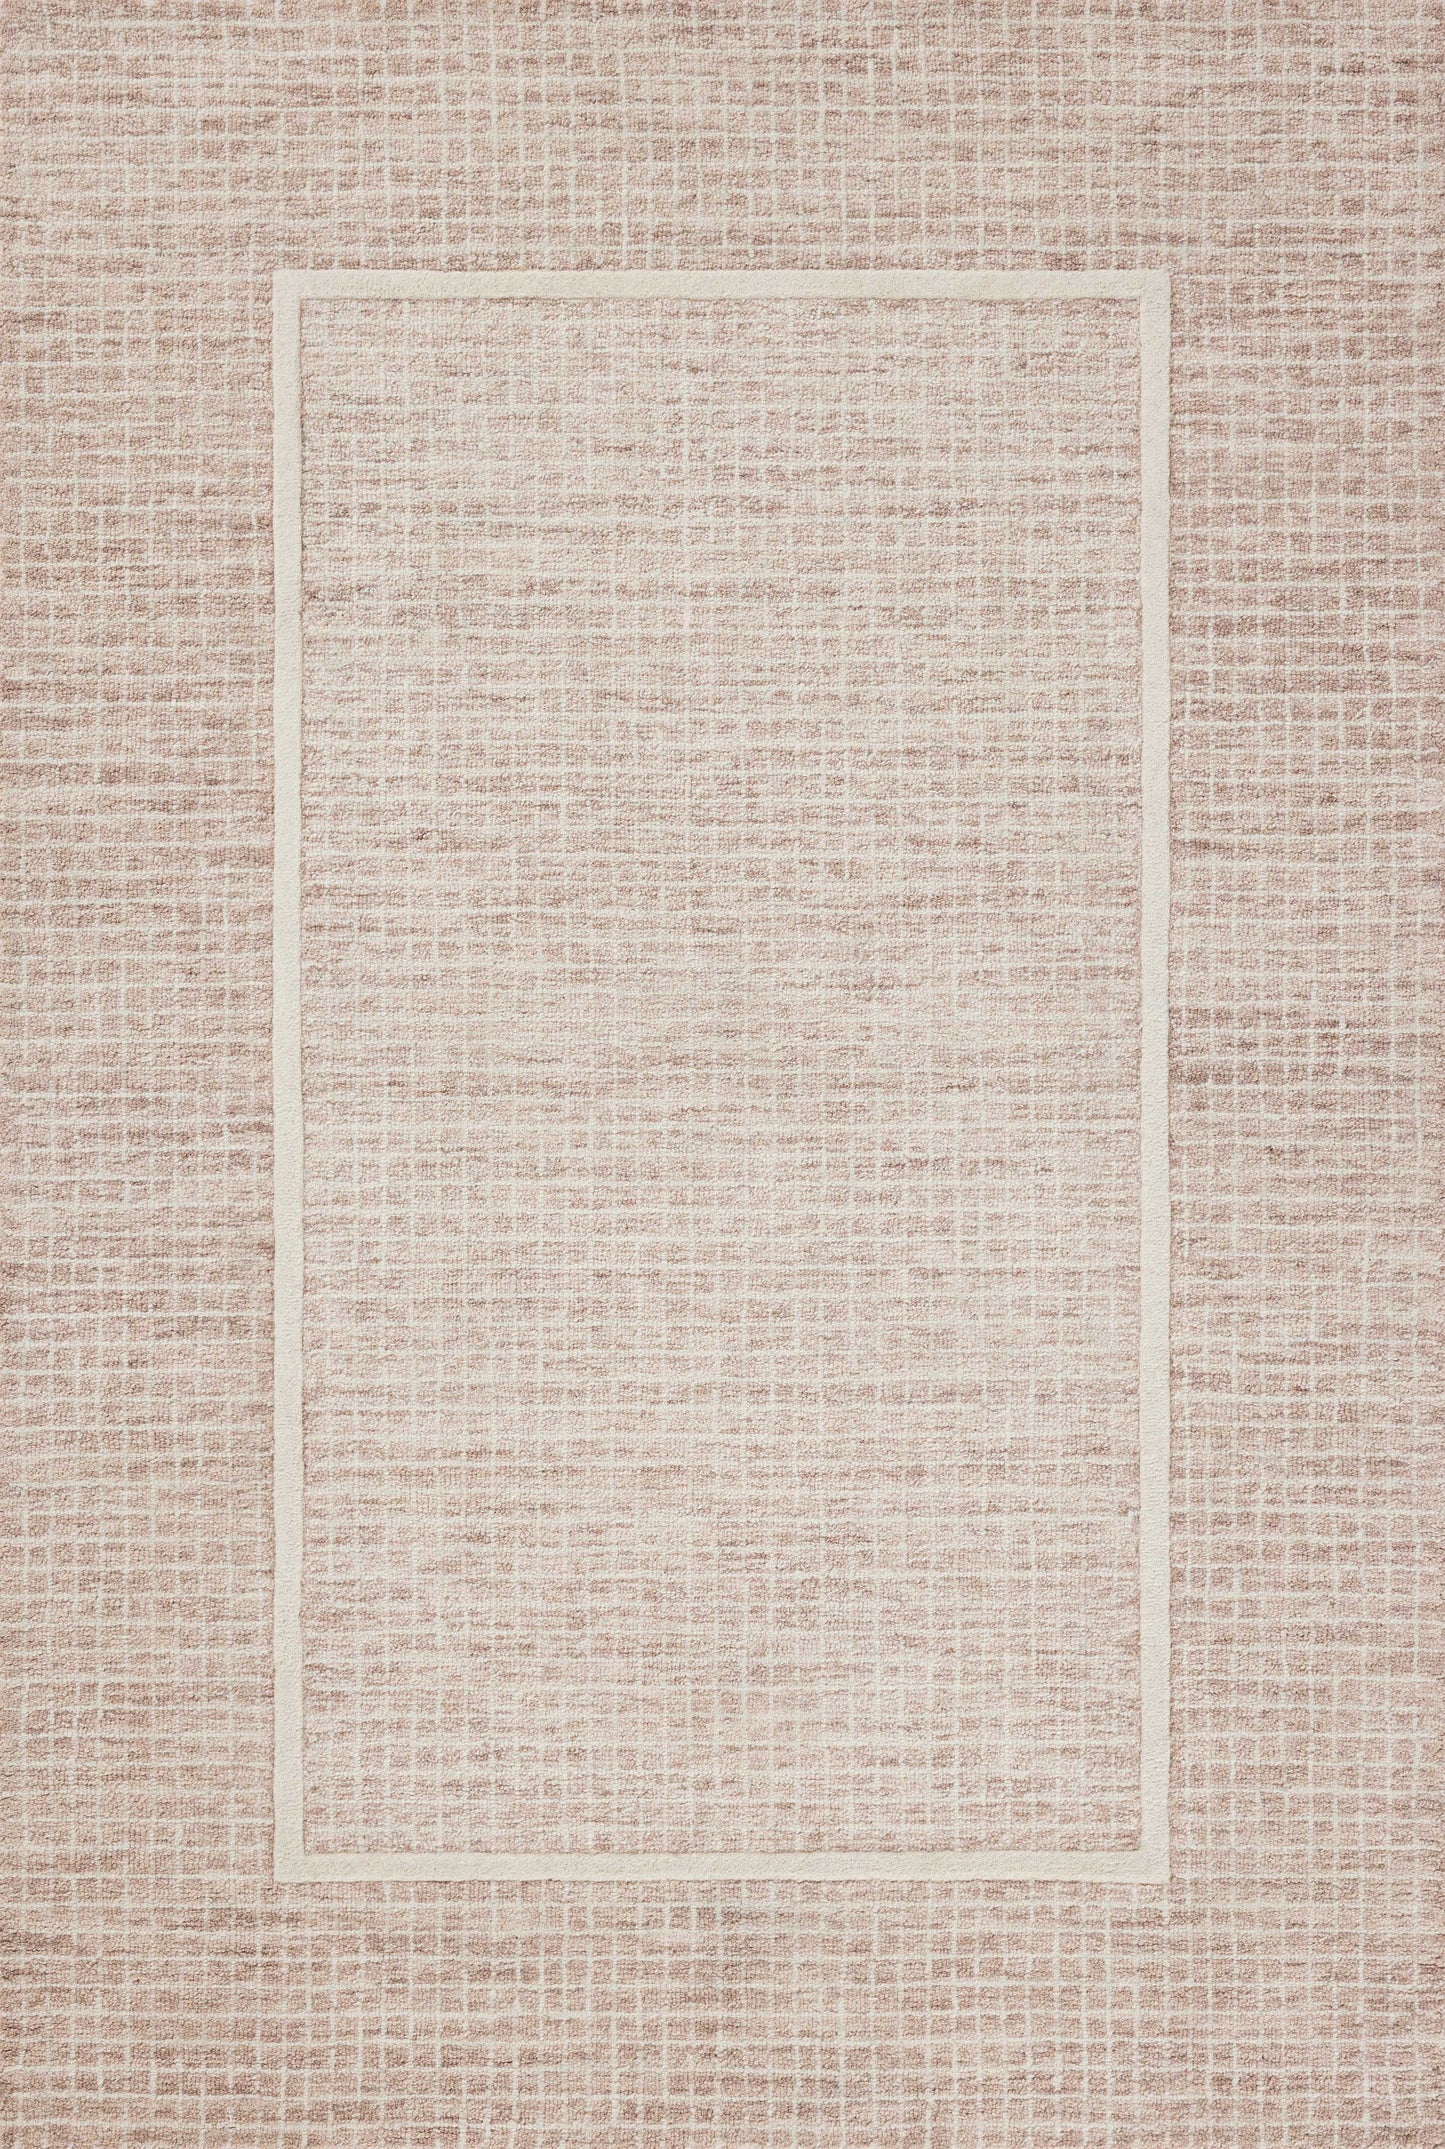 A picture of Loloi's Briggs rug, in style BRG-01, color Blush / Ivory